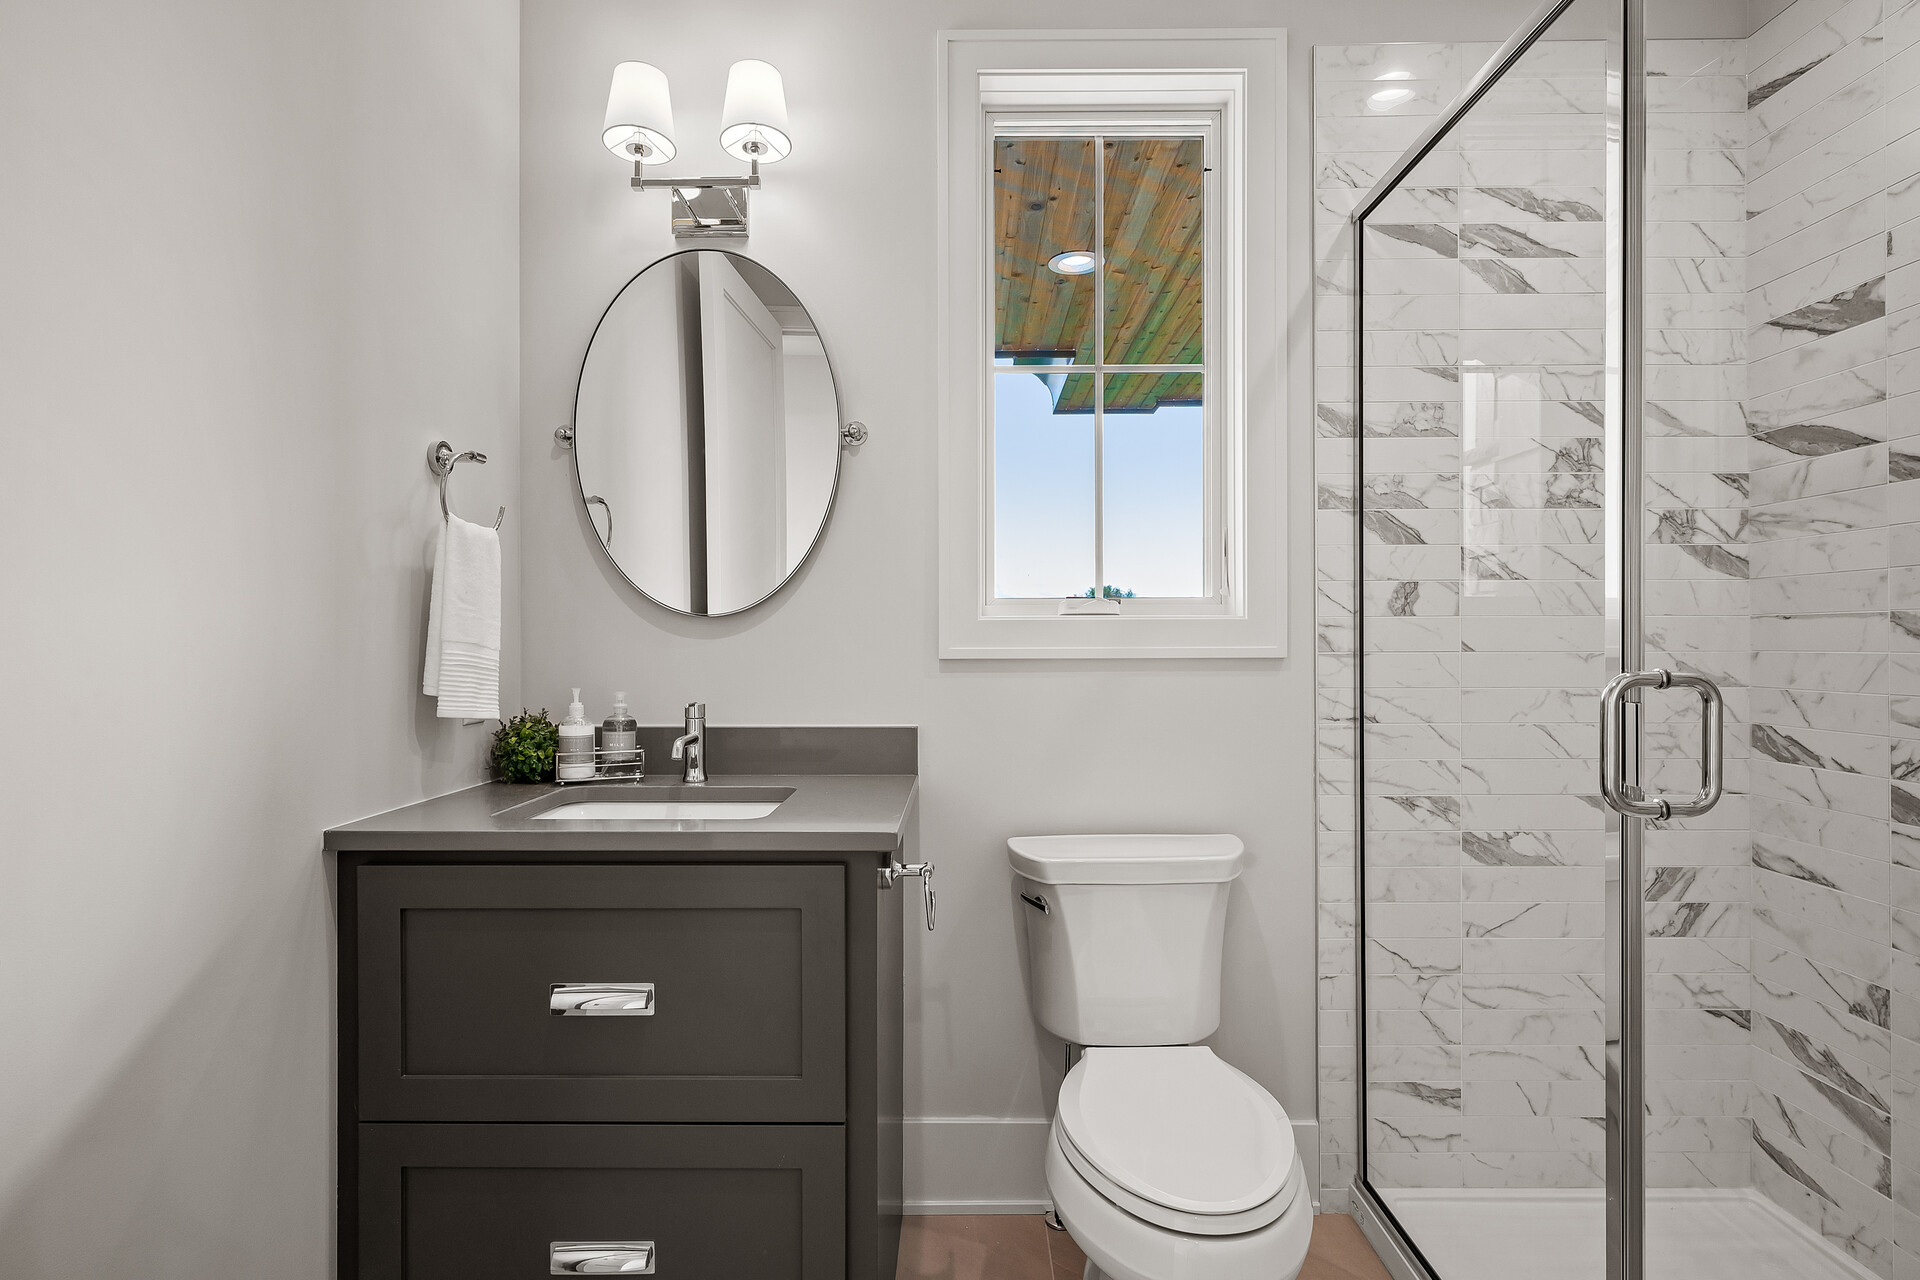 A prairie transitional bathroom with a toilet, sink and shower in a custom home.